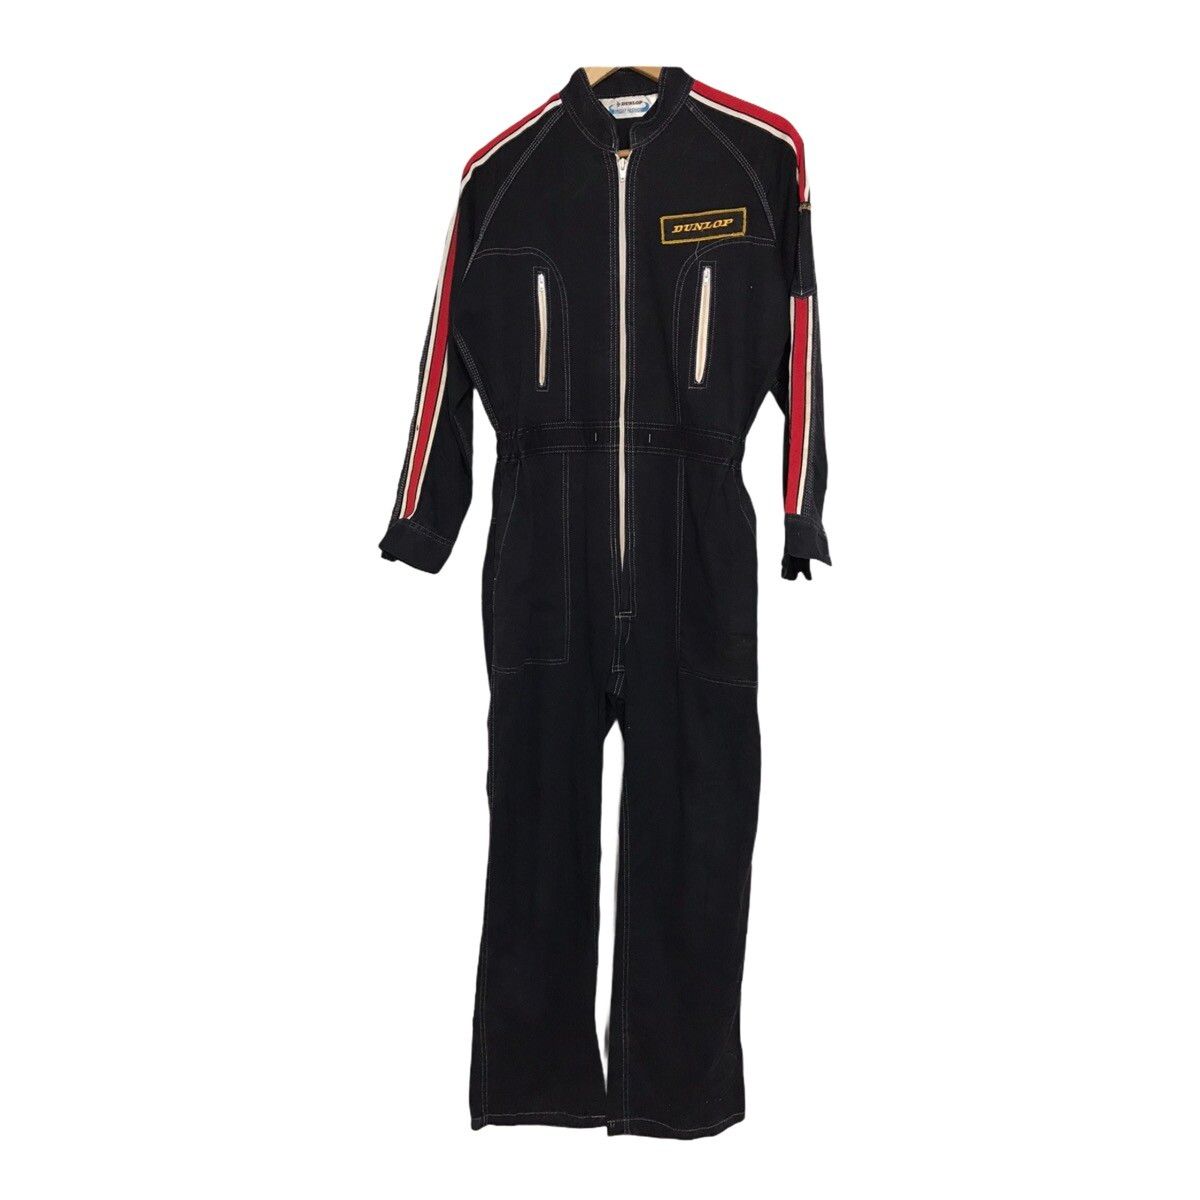 Vintage dunlop circuit fashion racing big spell overall - 1